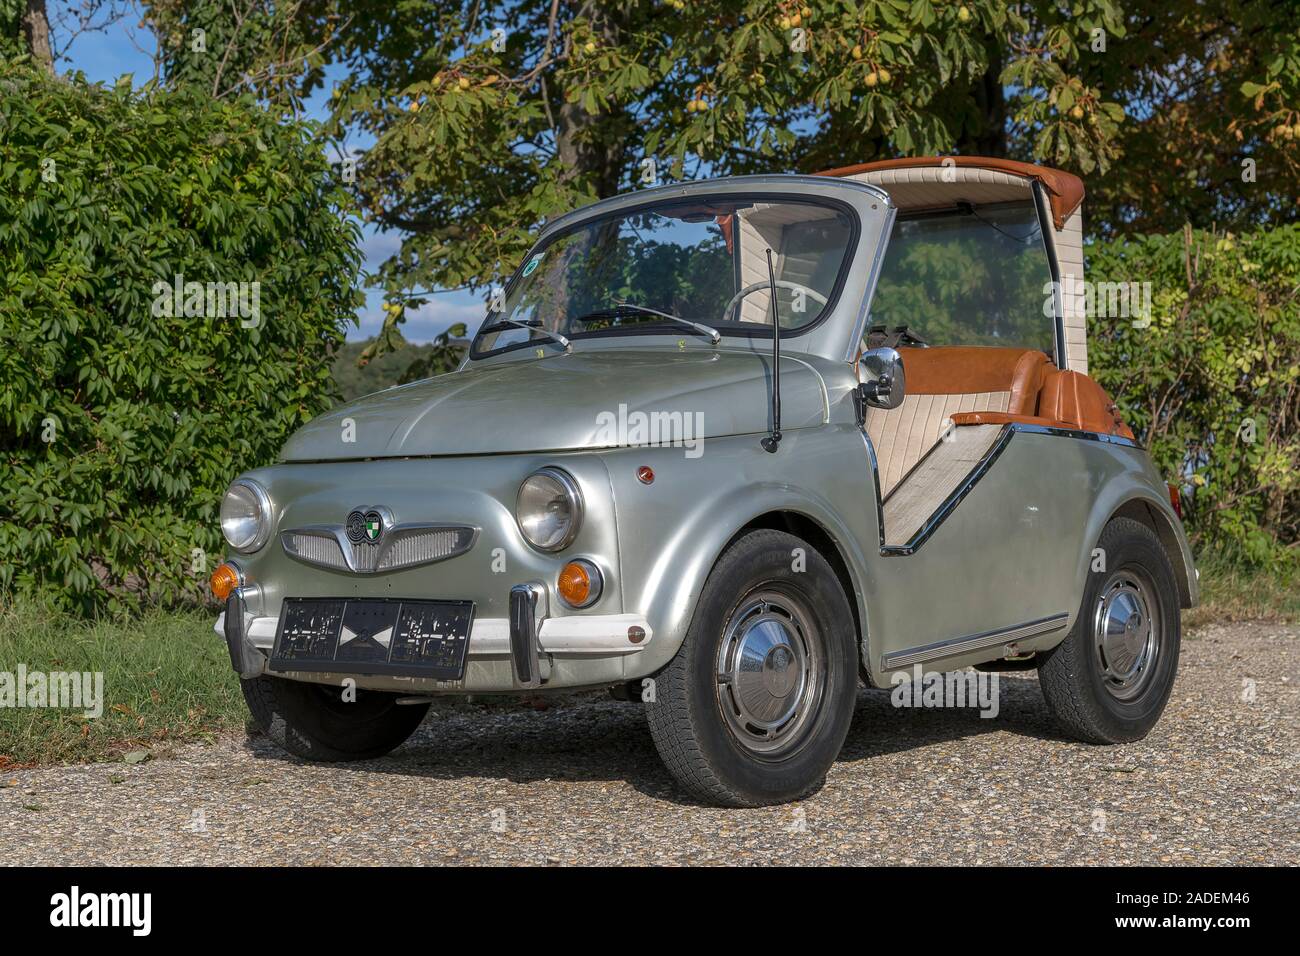 Oldtimer Puch 500D, modified Sacher, year of construction 1974, 2 cylinders, capacity 493 ccm, PS 16, 110 km/h, front chestnut tree, Austria Stock Photo